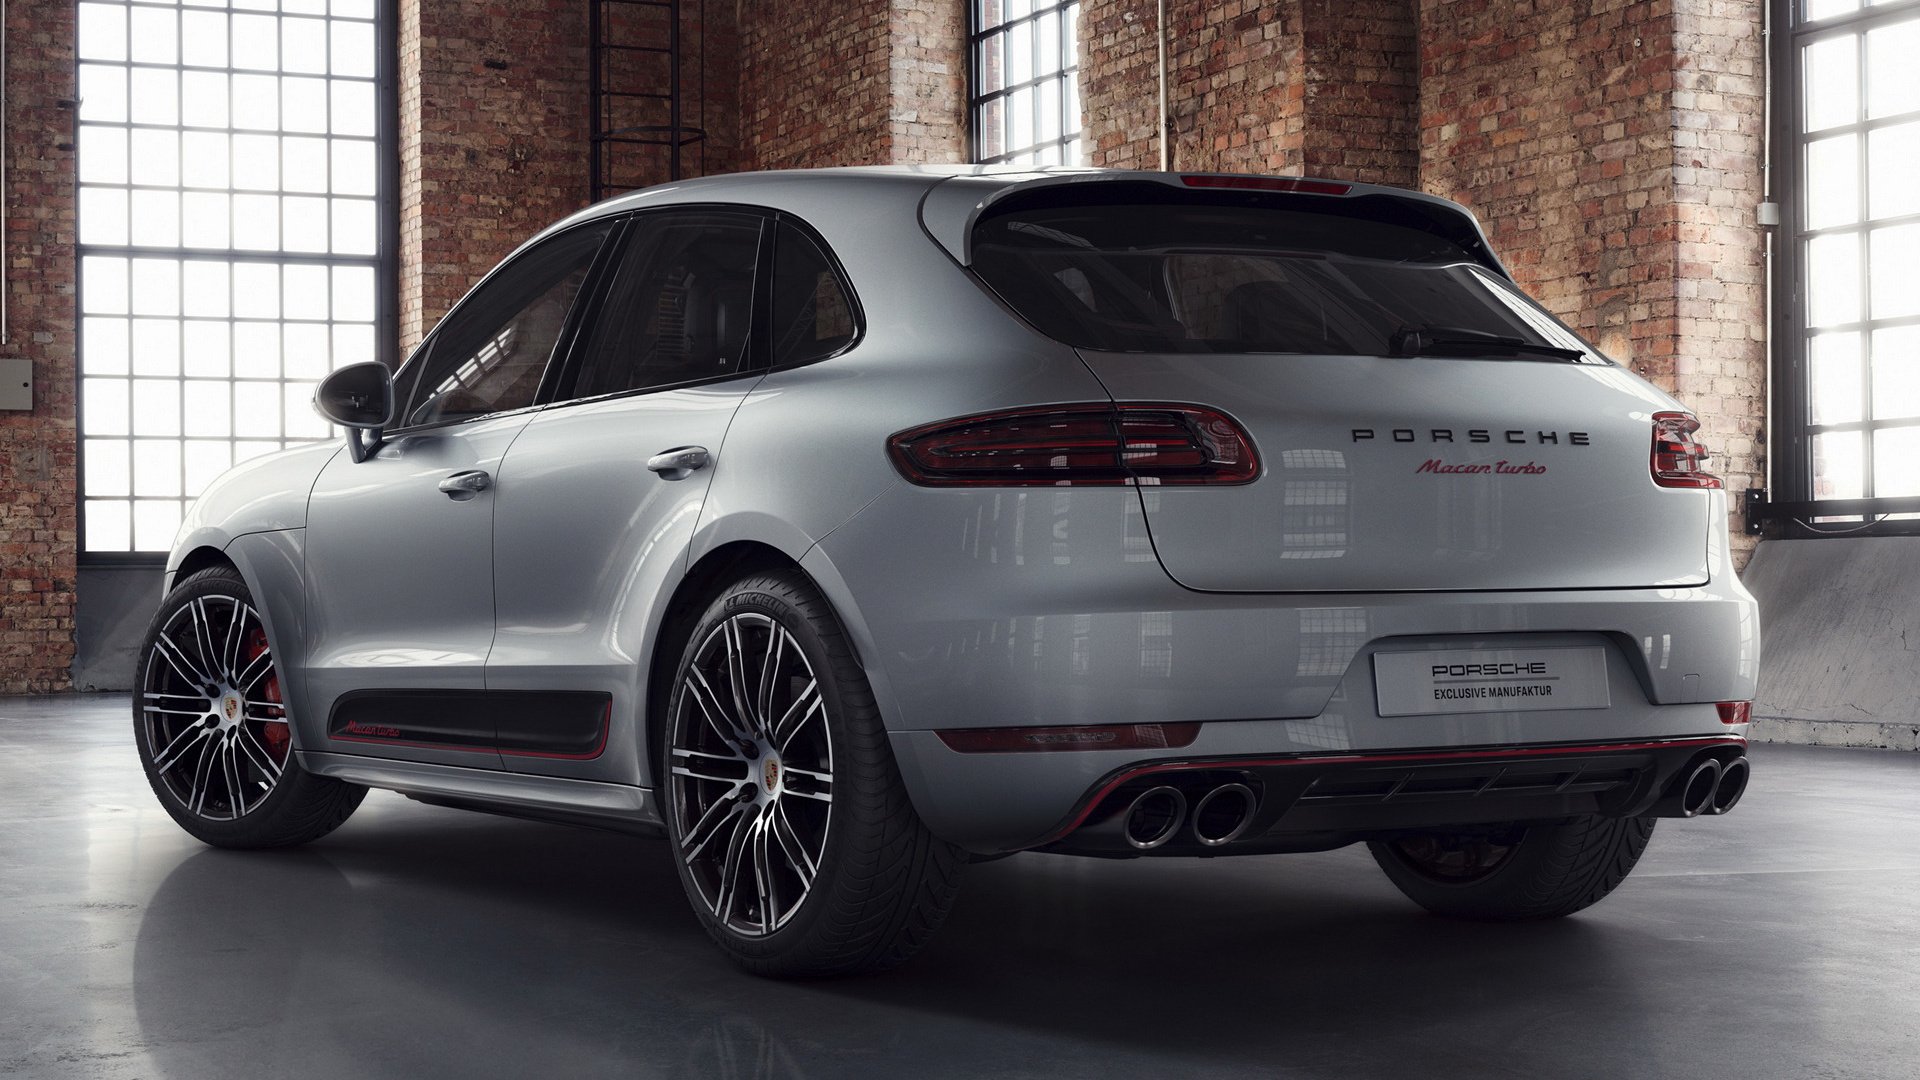 2017 Porsche Macan Turbo Exclusive Performance Edition Hd Wallpaper Background Image 1920x1080